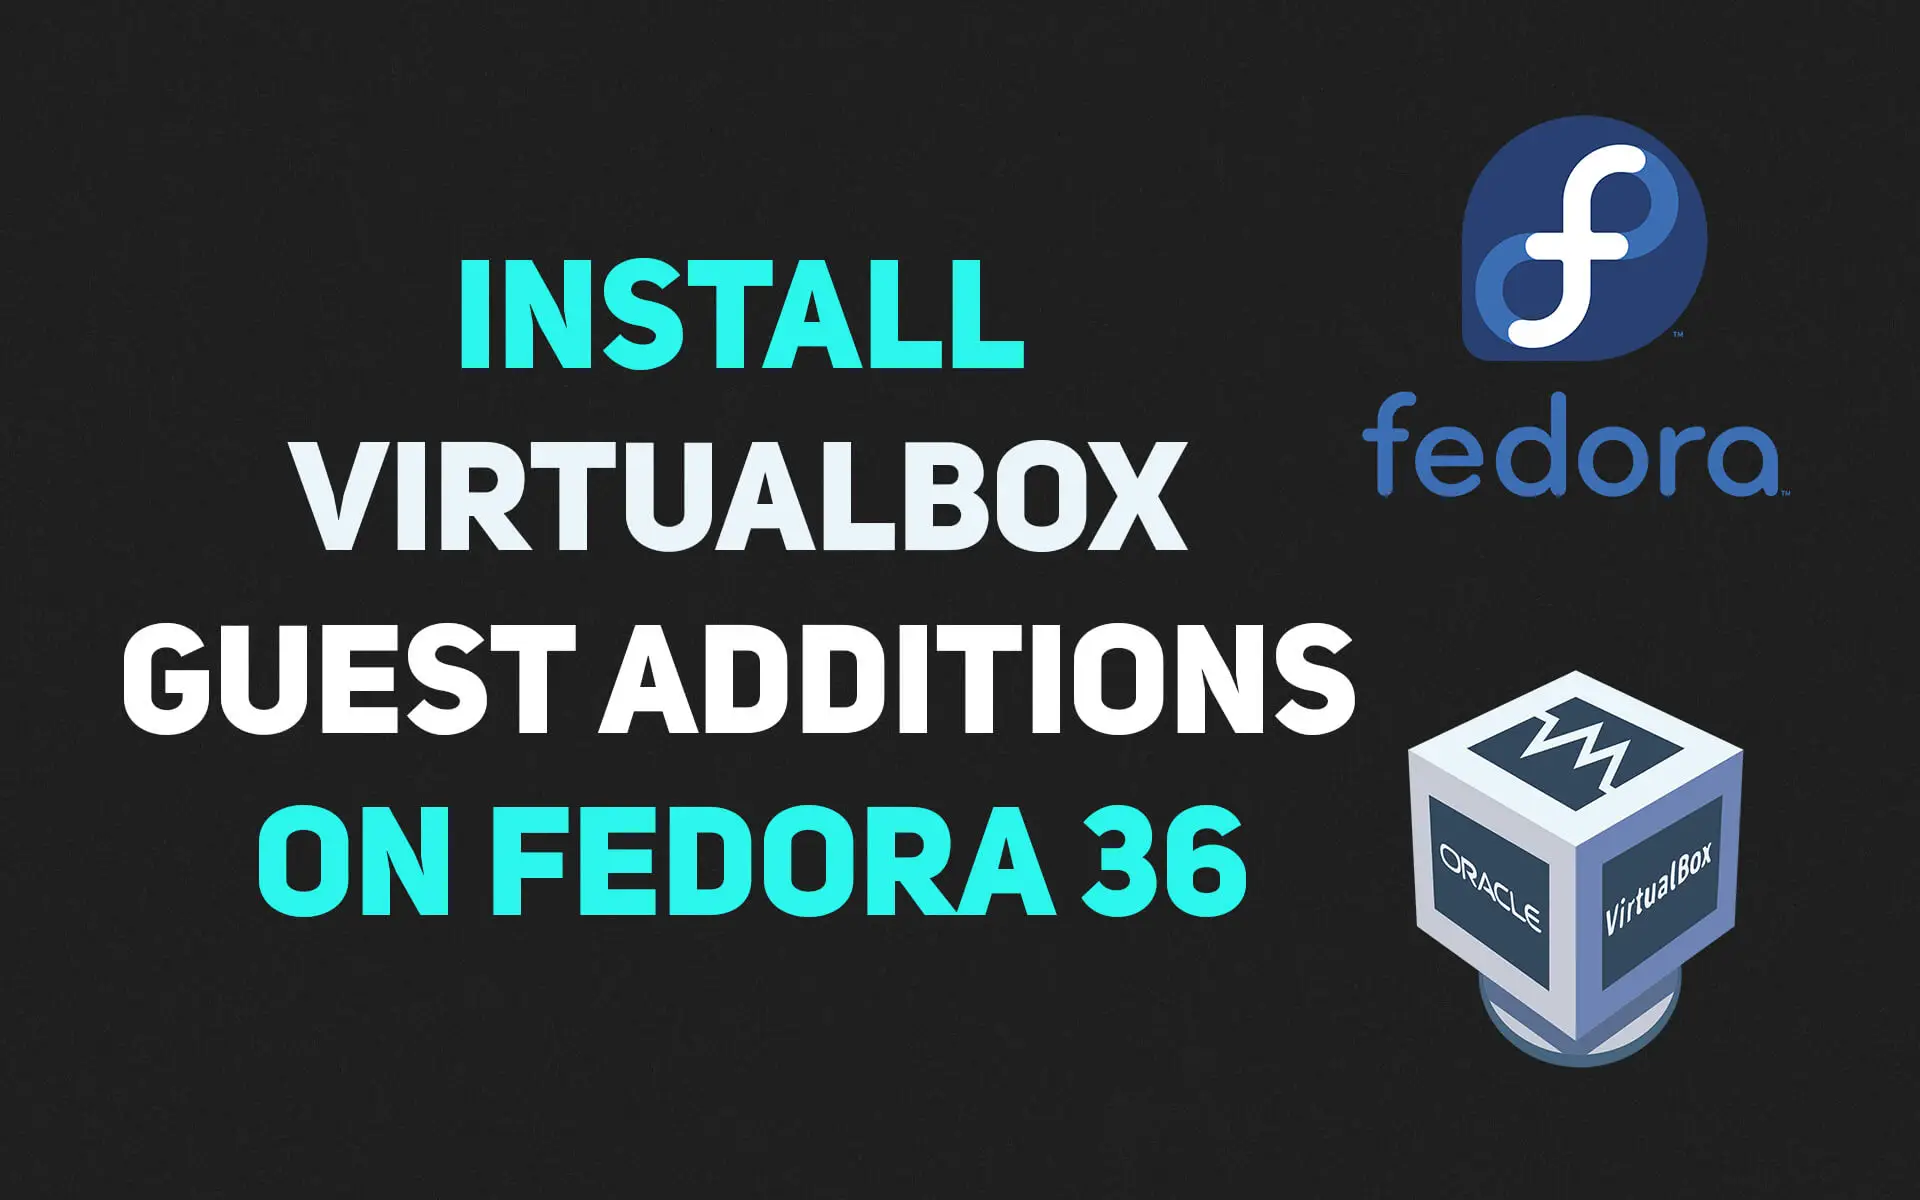 Install VirtualBox Guest Additions on Fedora 36